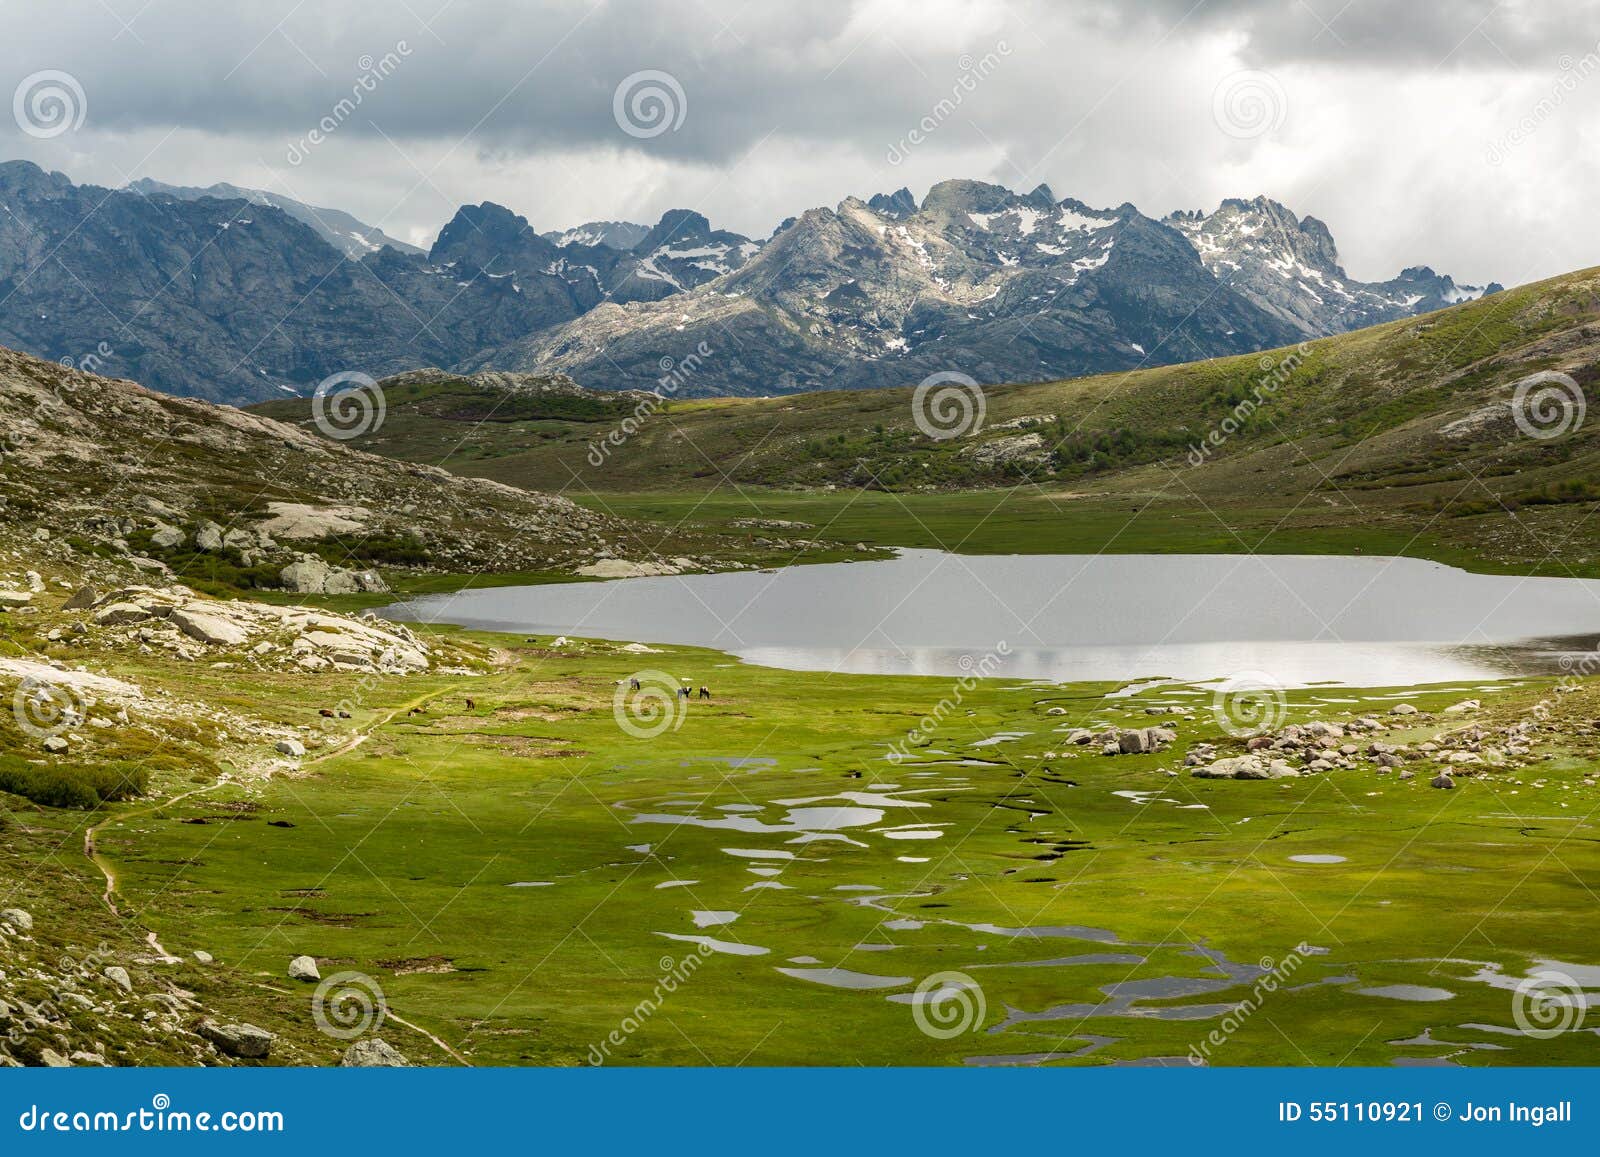 lac de nino in corsica with mountains in the background